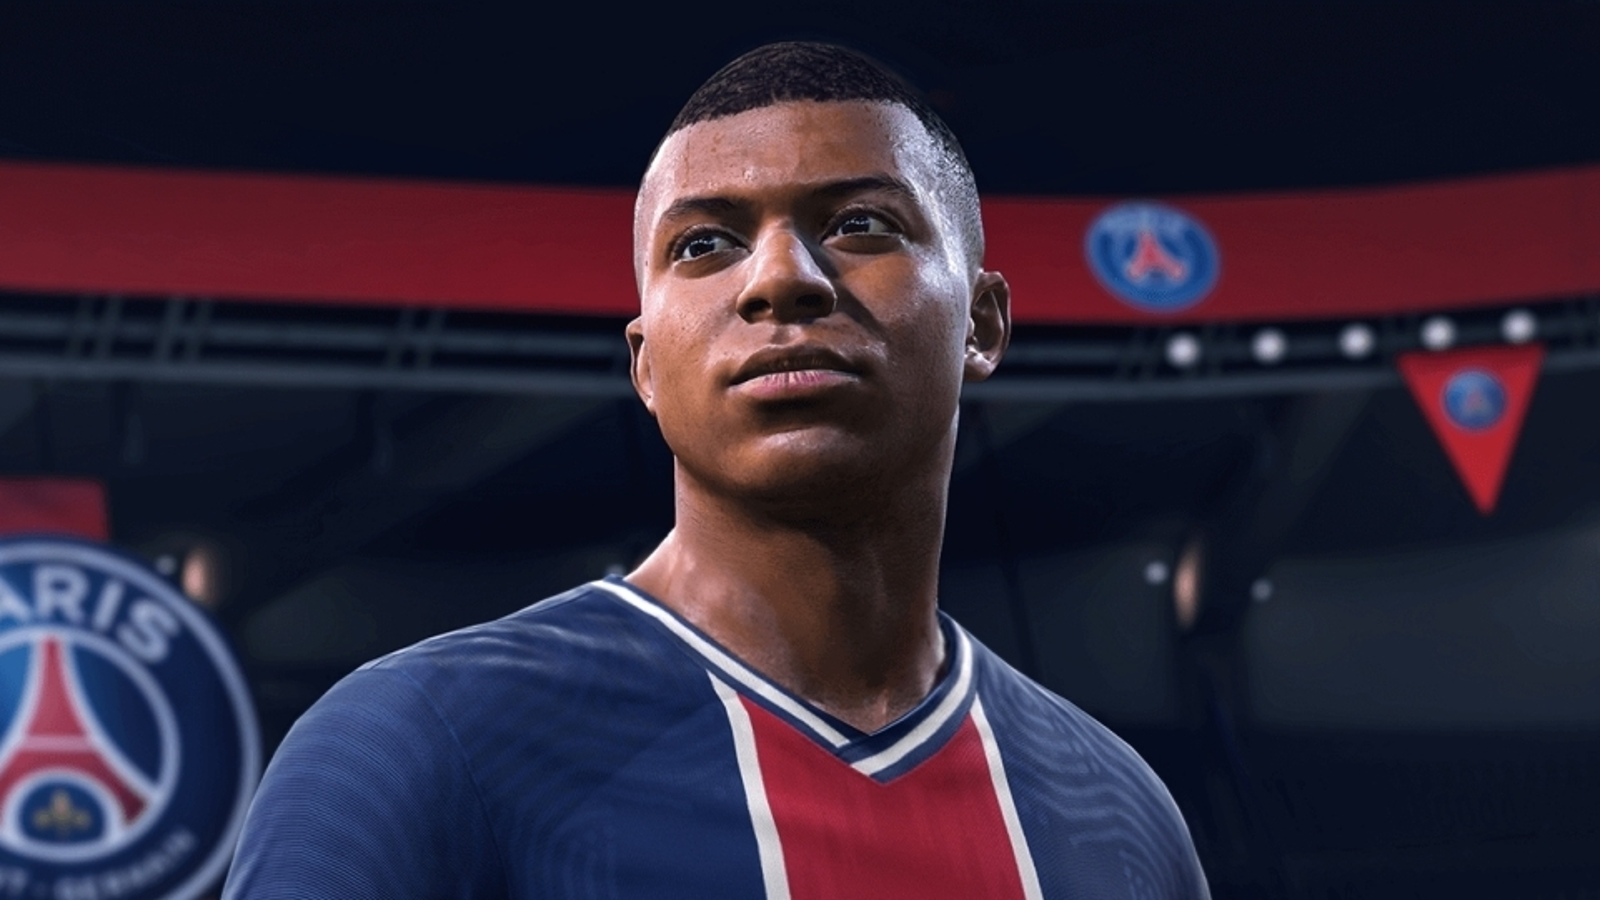 FIFA 22: Pre Download available on Xbox Series X, S & One